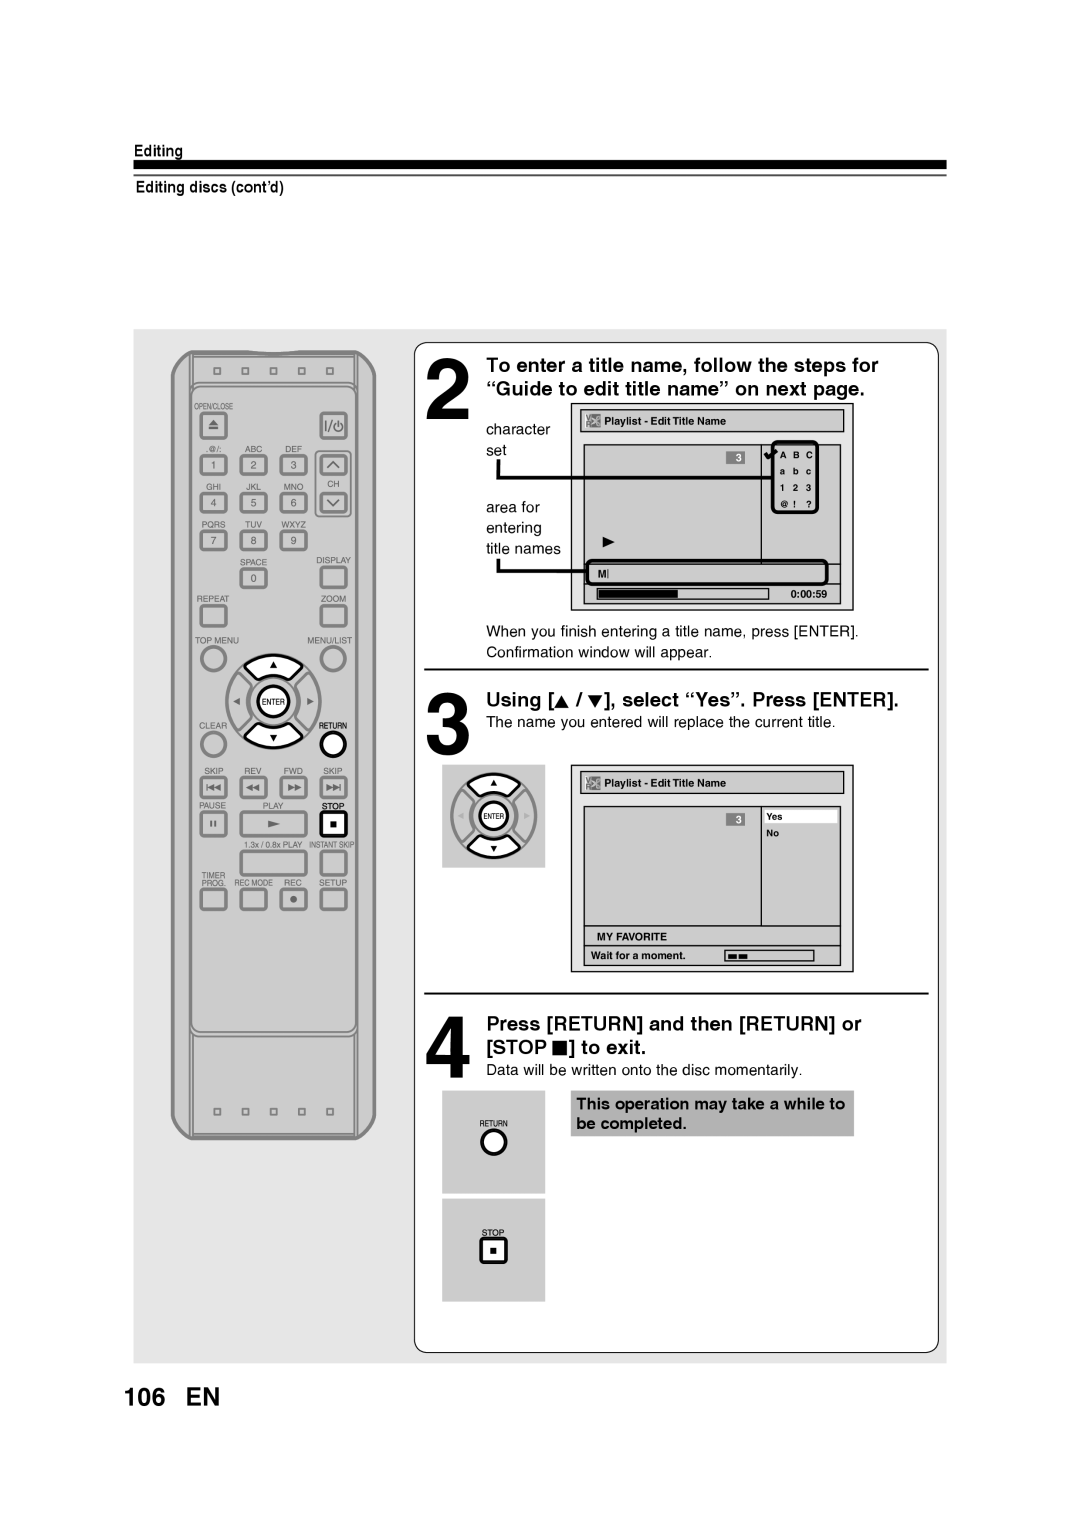 Toshiba D-RW2SU/D-RW2SC 106 EN, “Guide to edit title name” on next page, Using K / L, select “Yes”. Press ENTER, character 